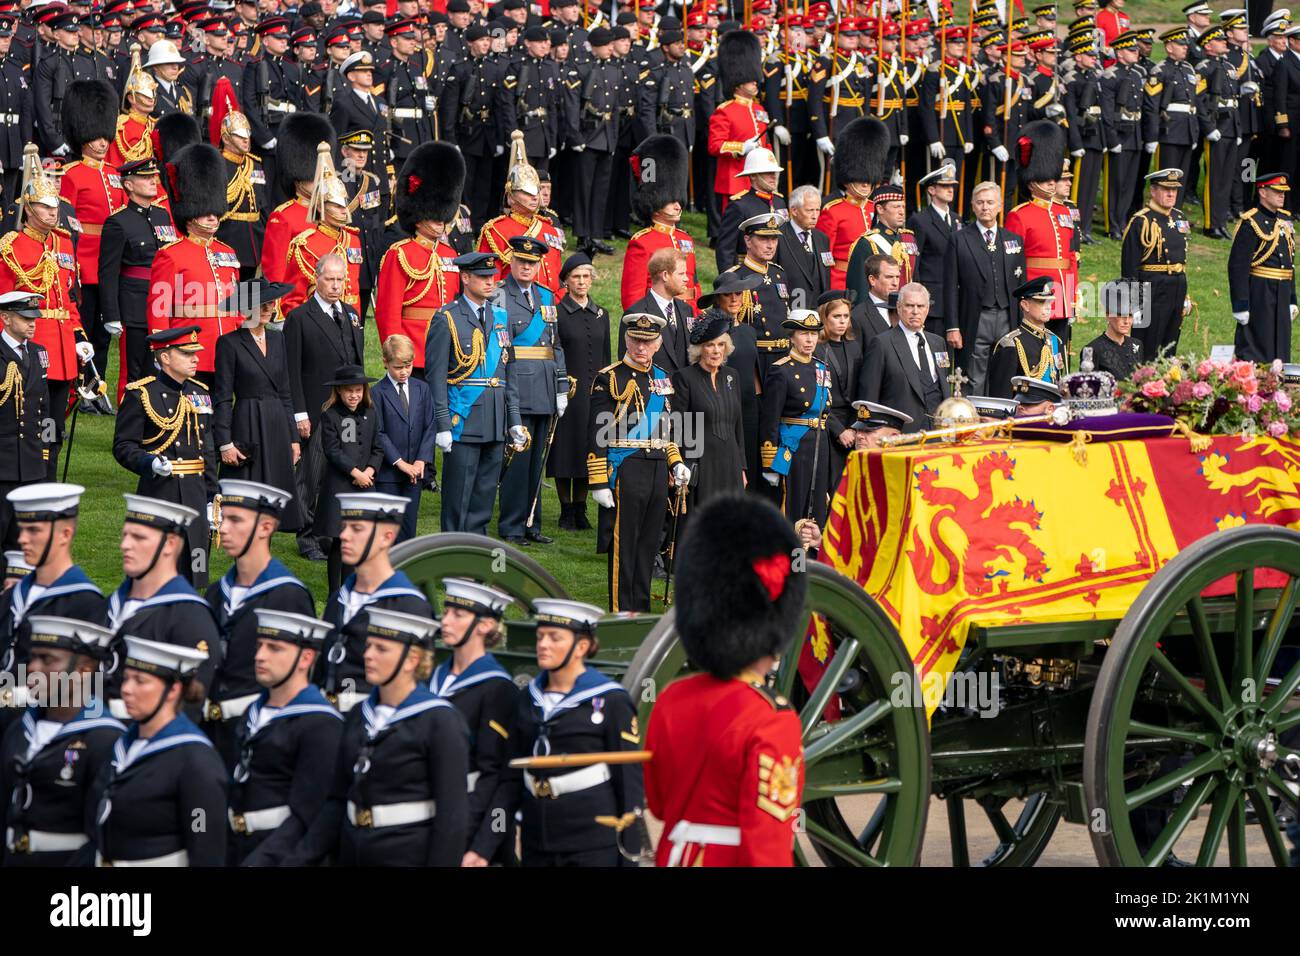 The Princess of Wales, Princess Charlotte, Prince George, King Charles III, the Duke of Sussex, the Queen Consort,the Duchess of Sussex, the Princess Royal, Princess Beatrice, Peter Phillips, the Duke of York, the Earl of Wessex and the Countess of Wessex look on as the State Gun Carriage carrying the coffin of Queen Elizabeth II arrives at Wellington Arch during the Ceremonial Procession following her State Funeral at Westminster Abbey, London. Stock Photo